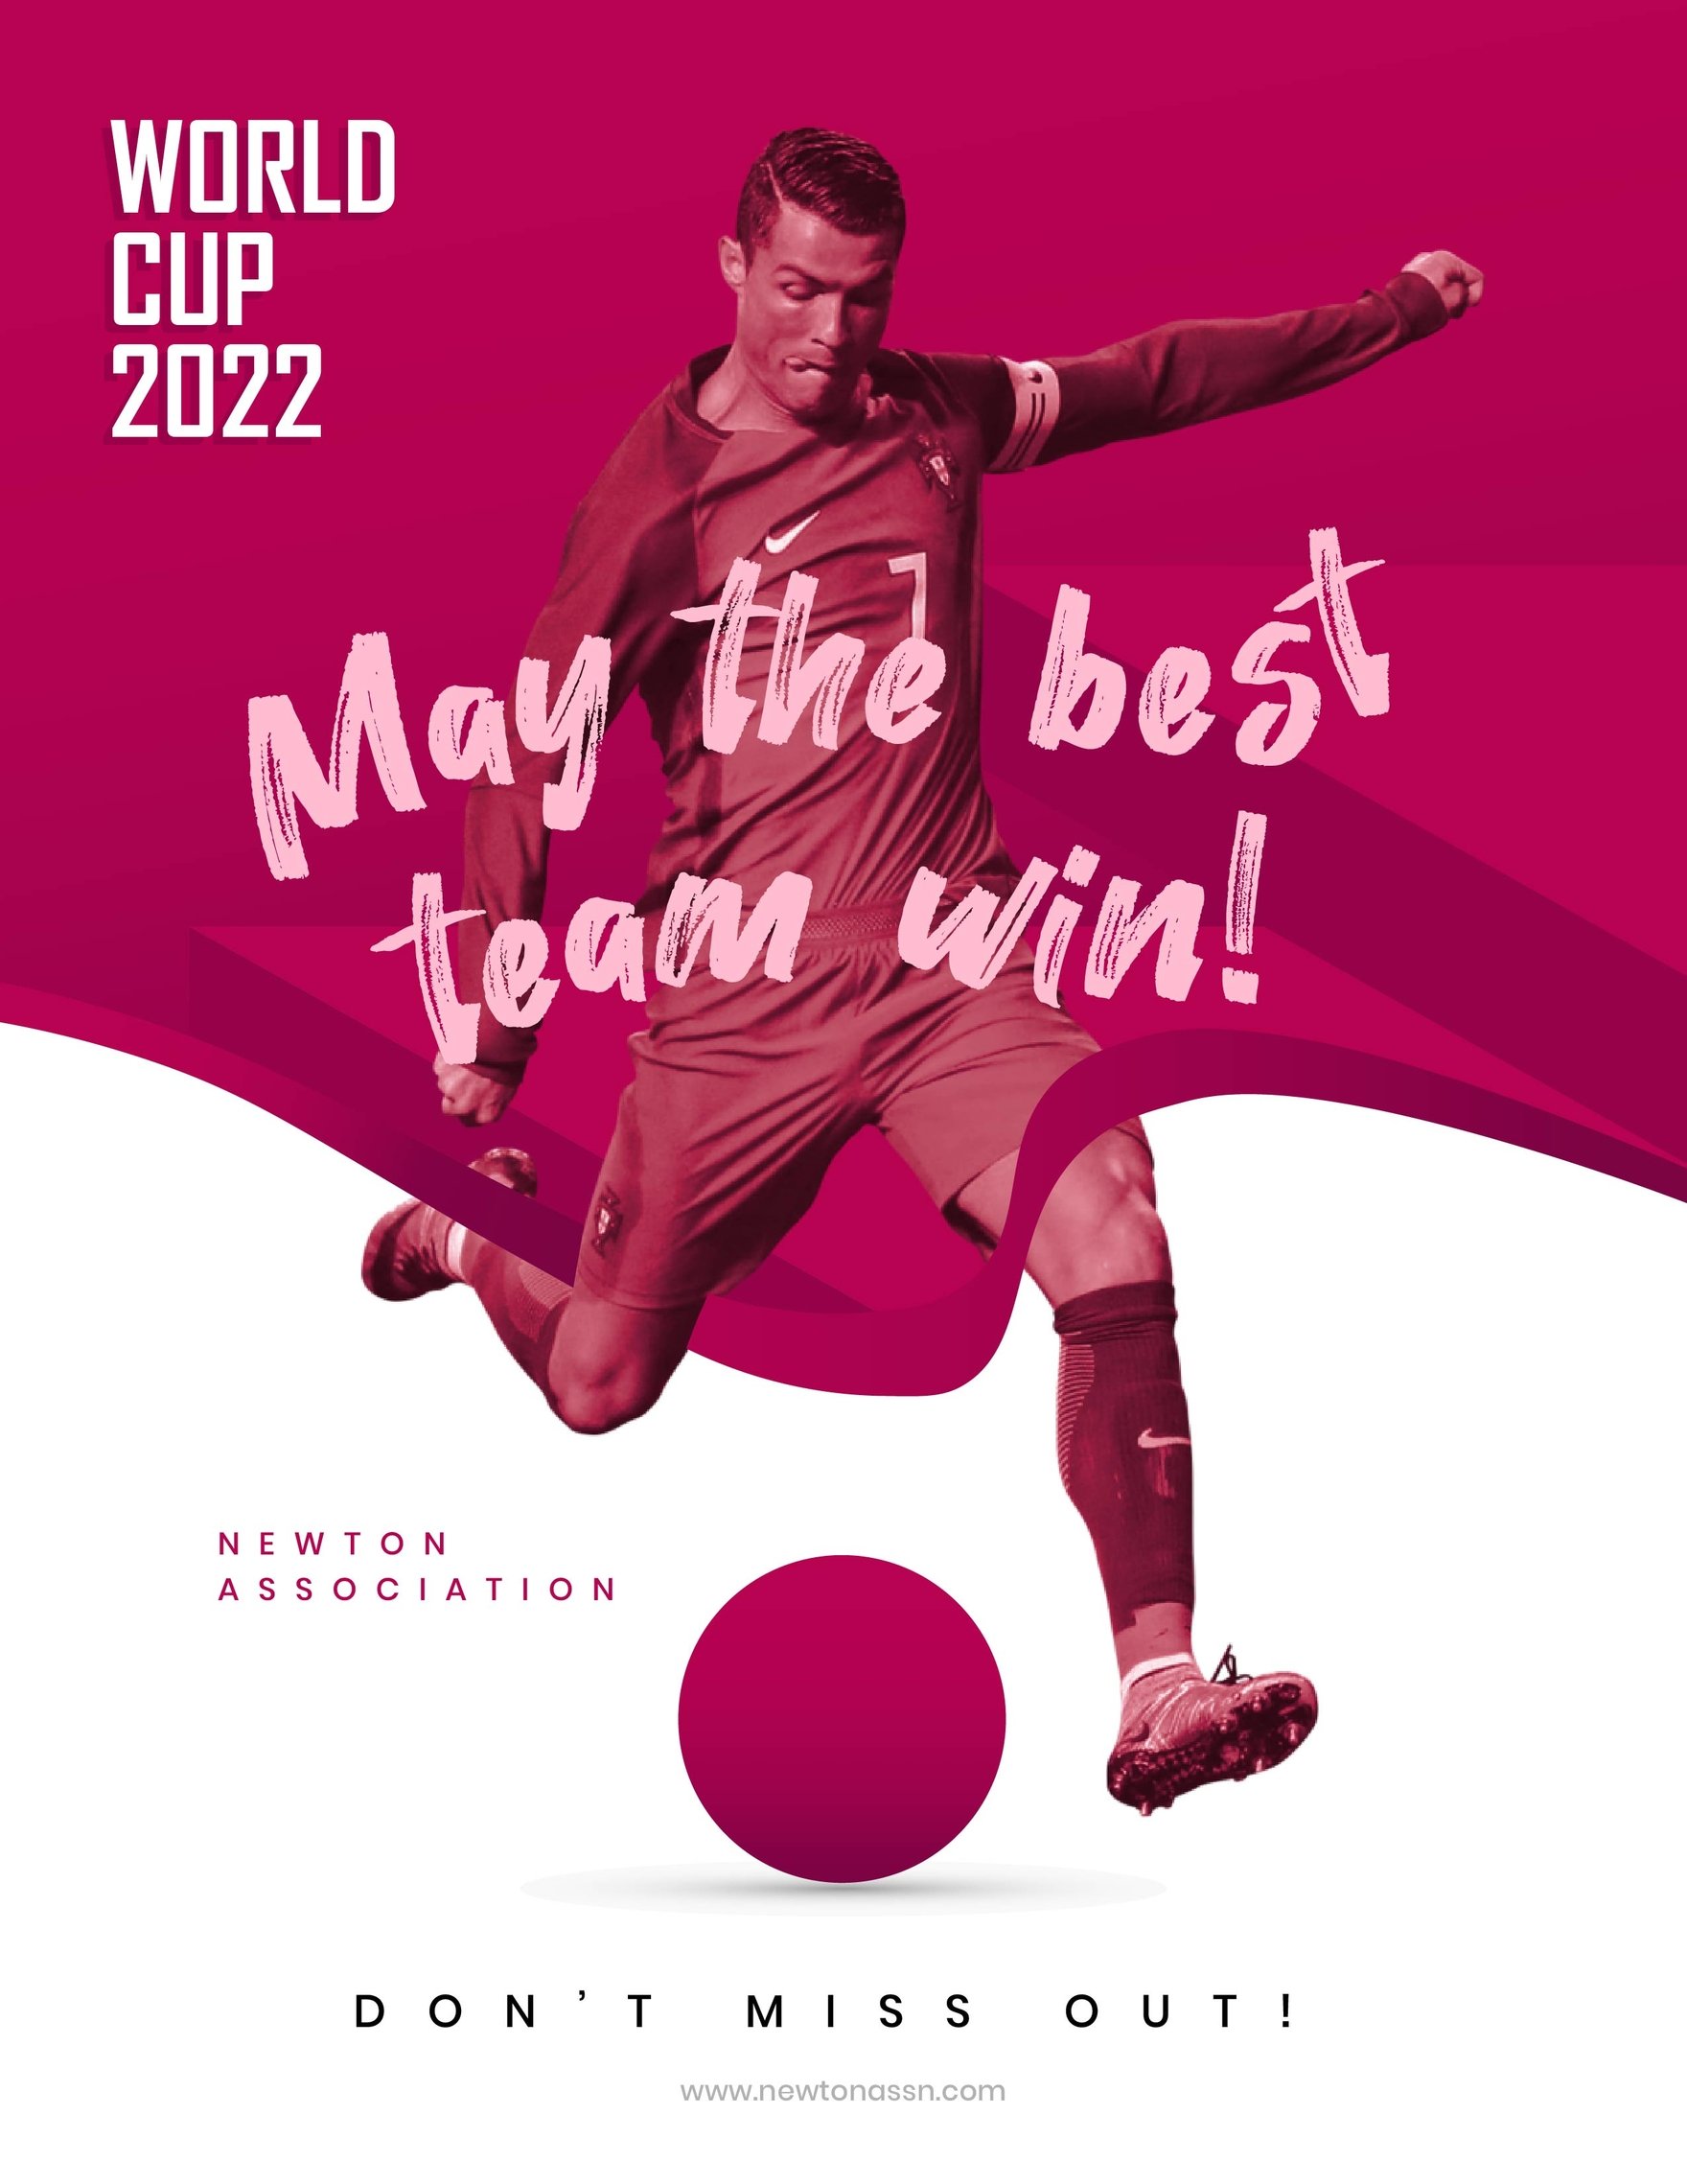 Free World Cup 2022 Flyer